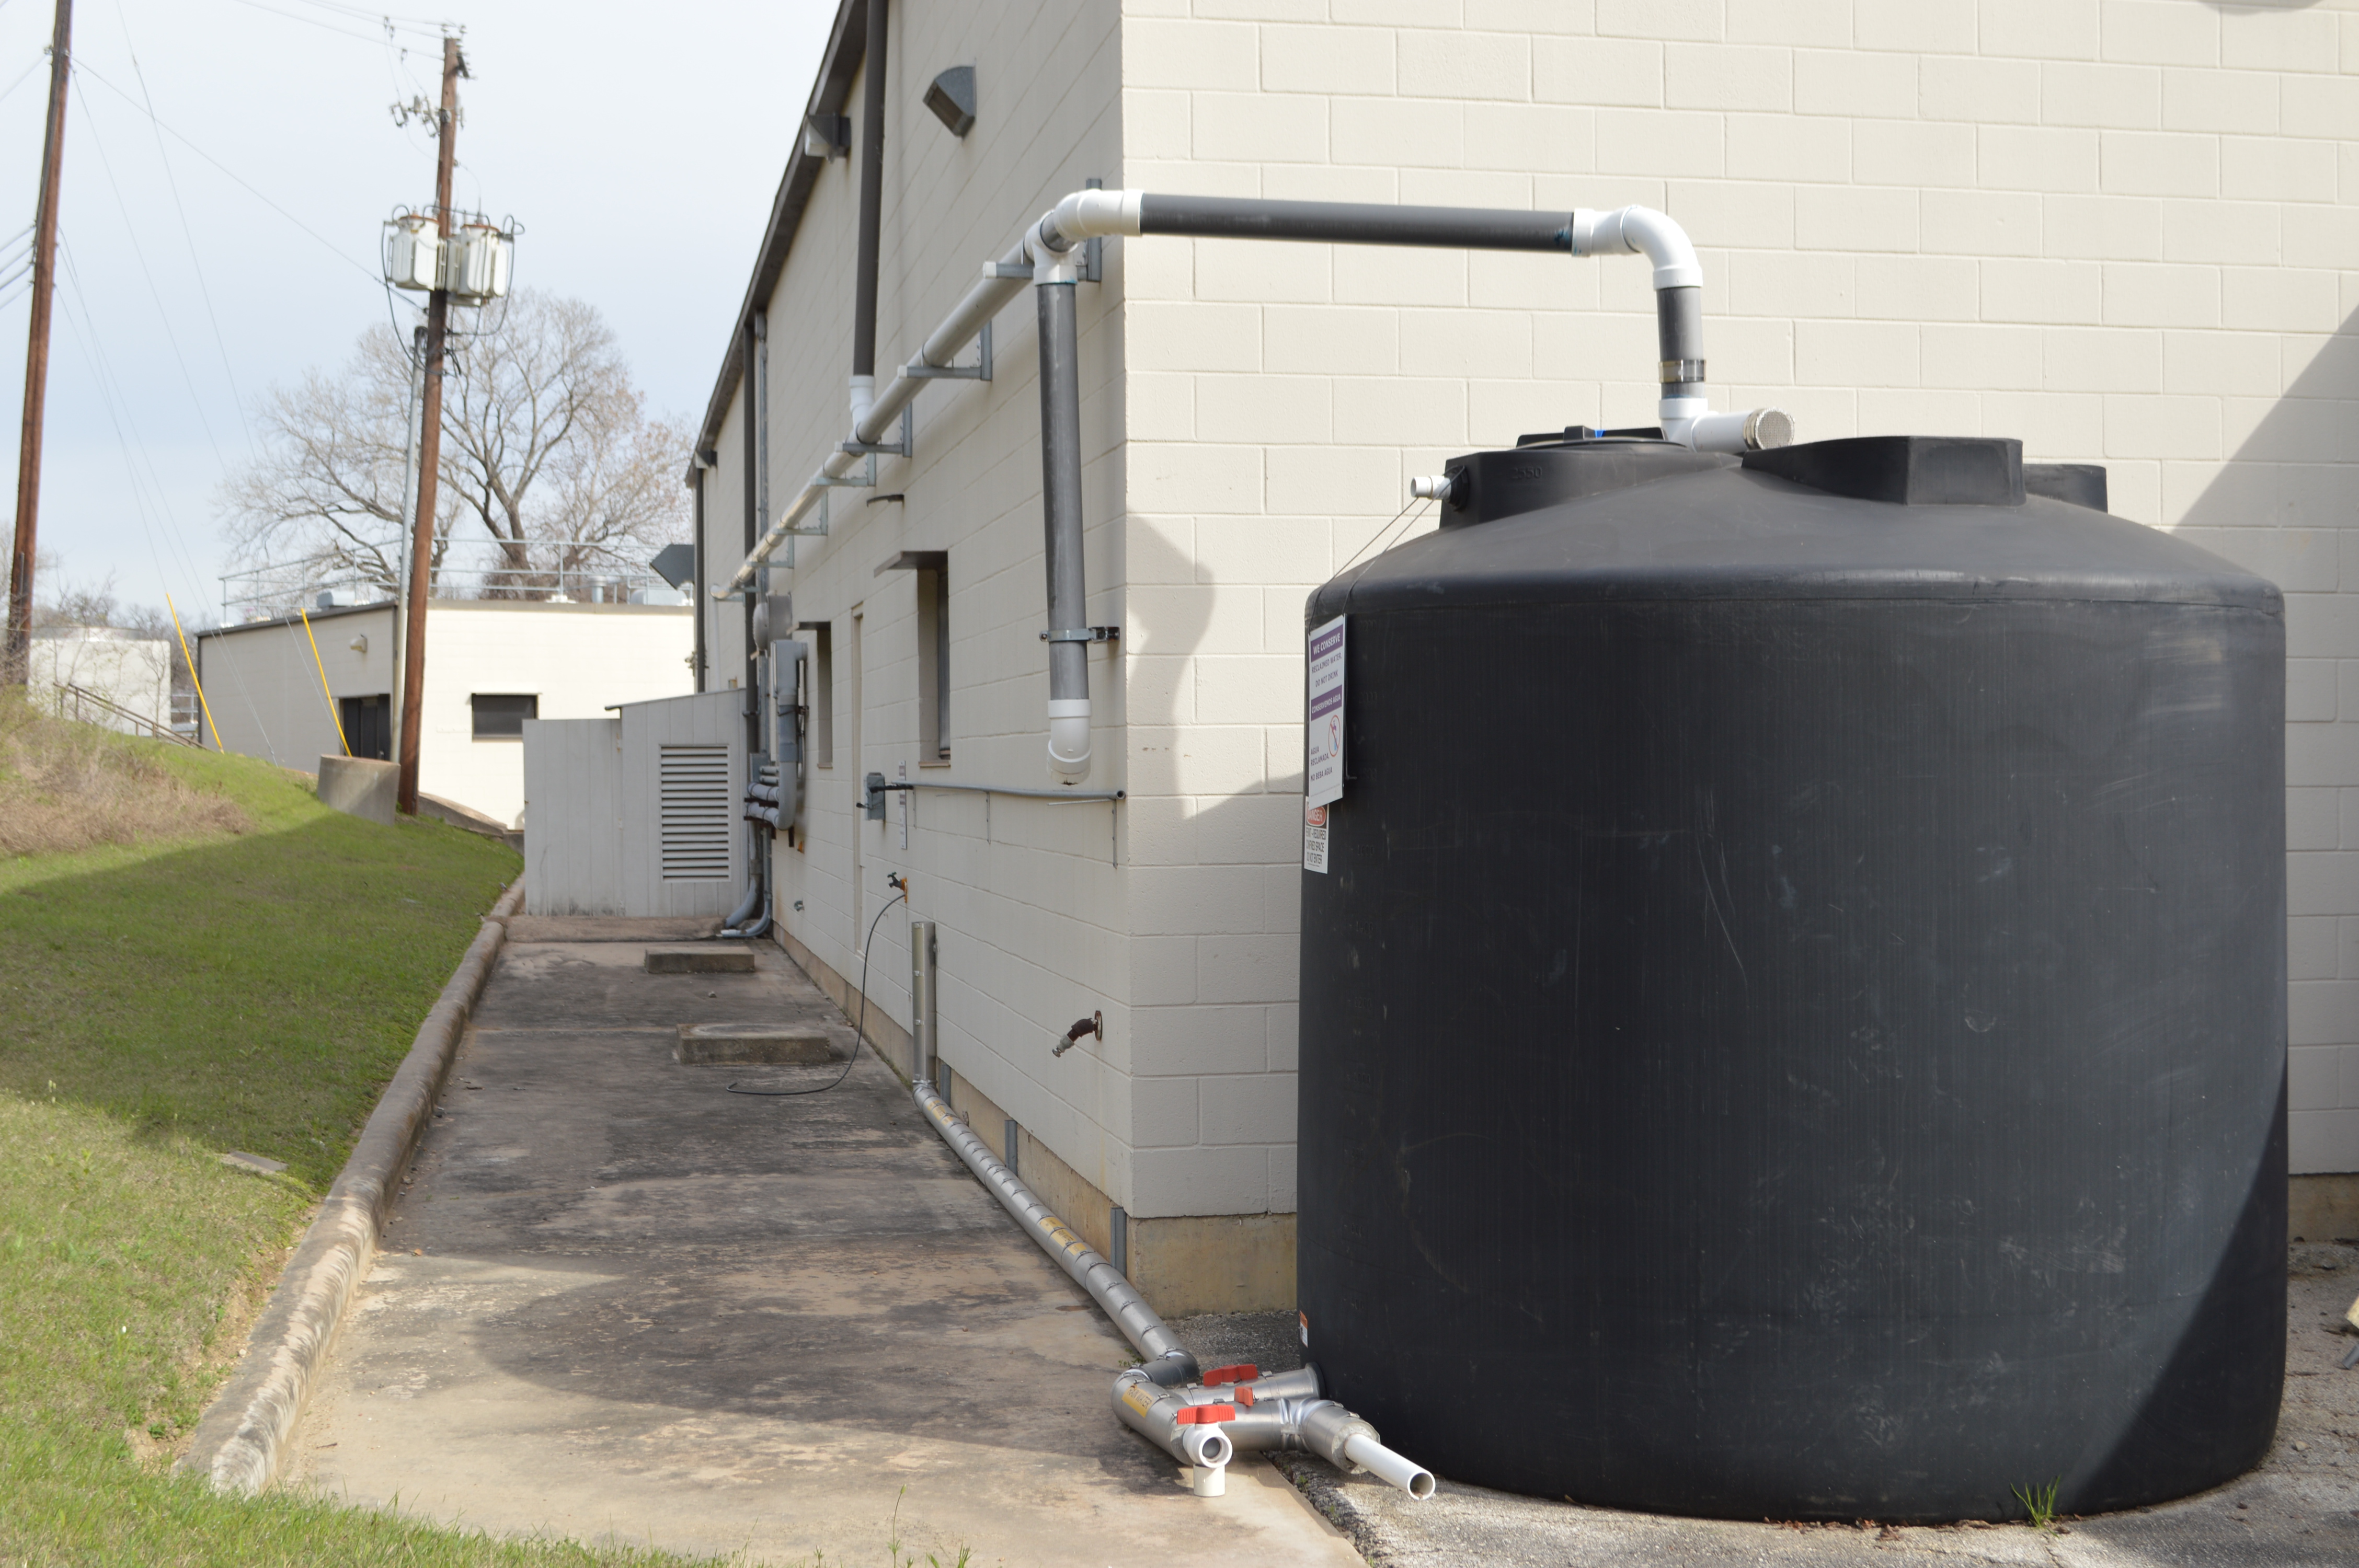 View of the storage tank for water for toilet flushing.